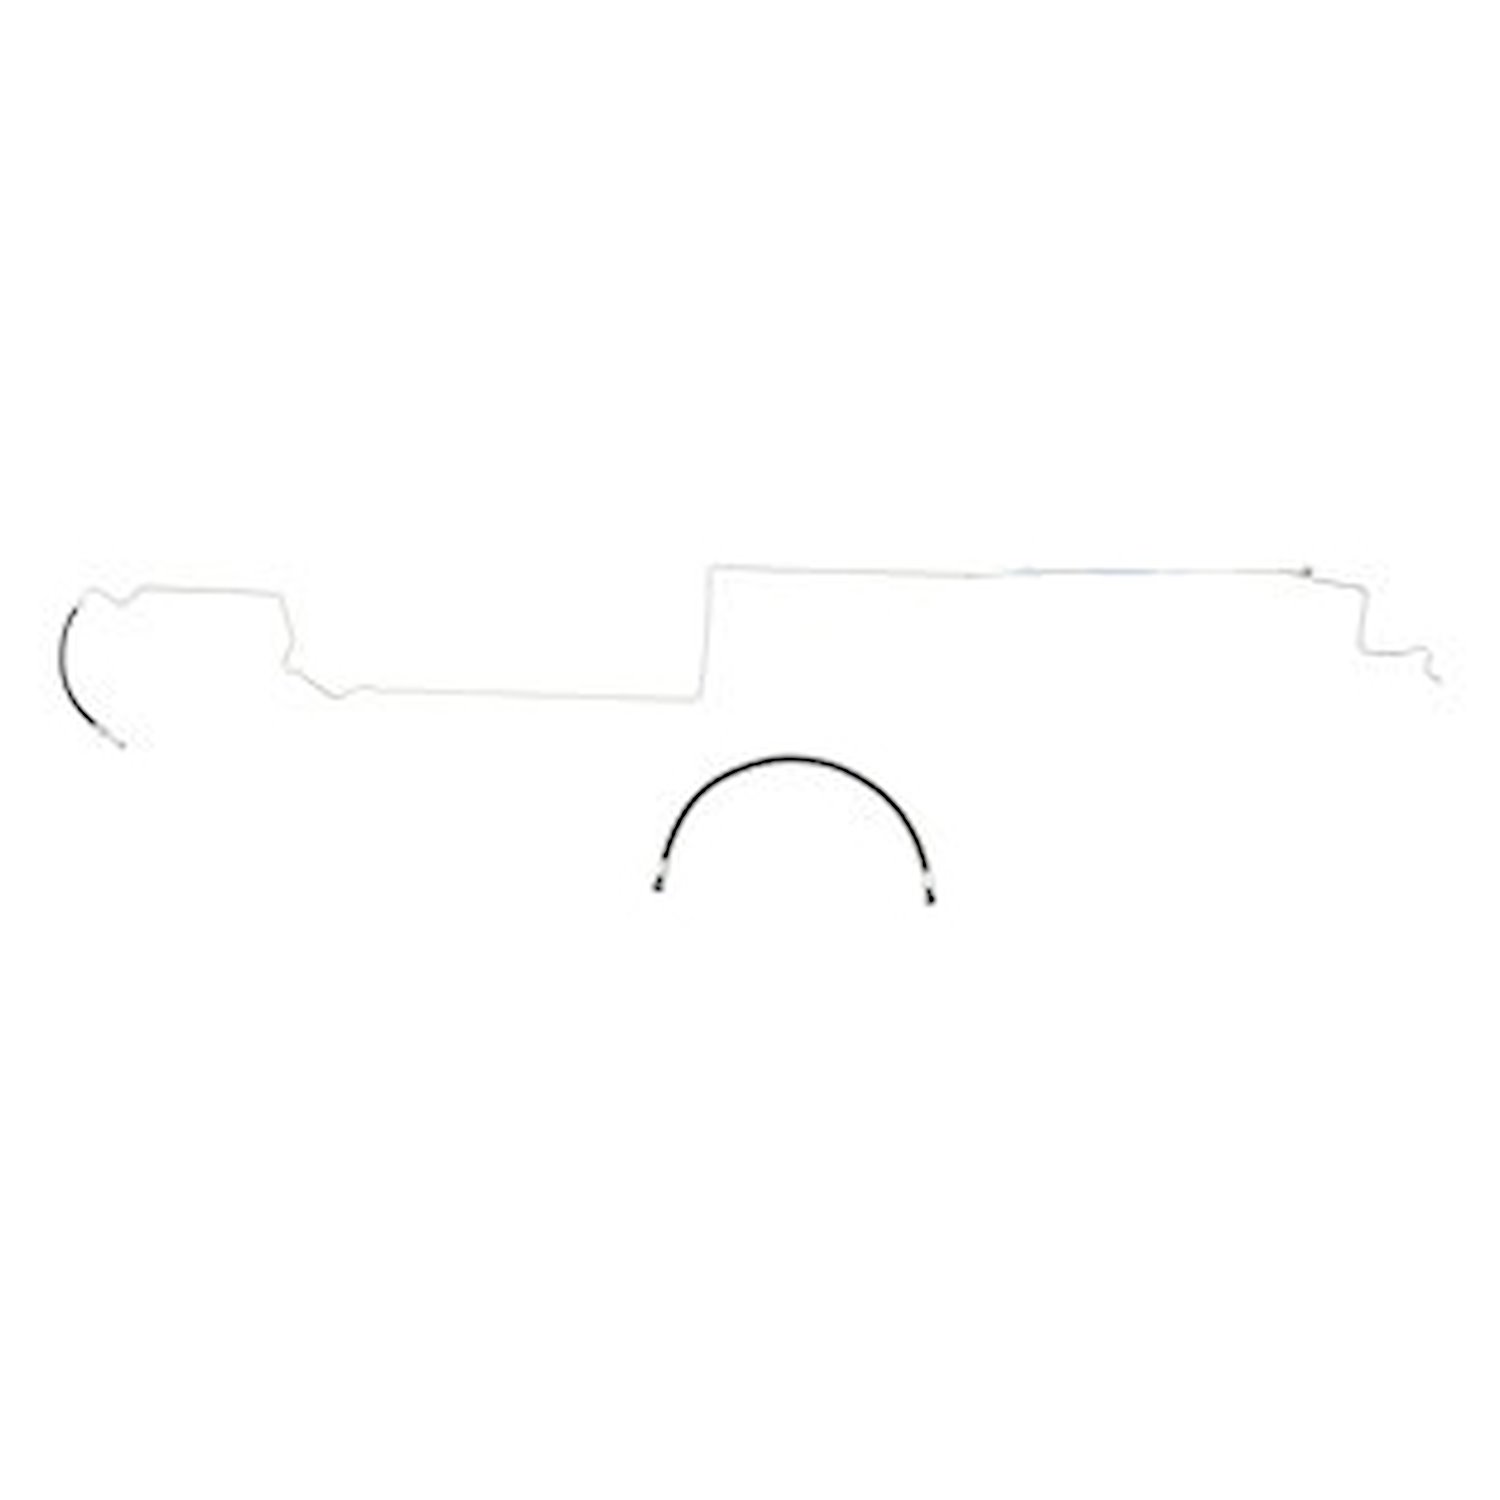 Ford Mustang Fuel Return Line -1986 1987 1988